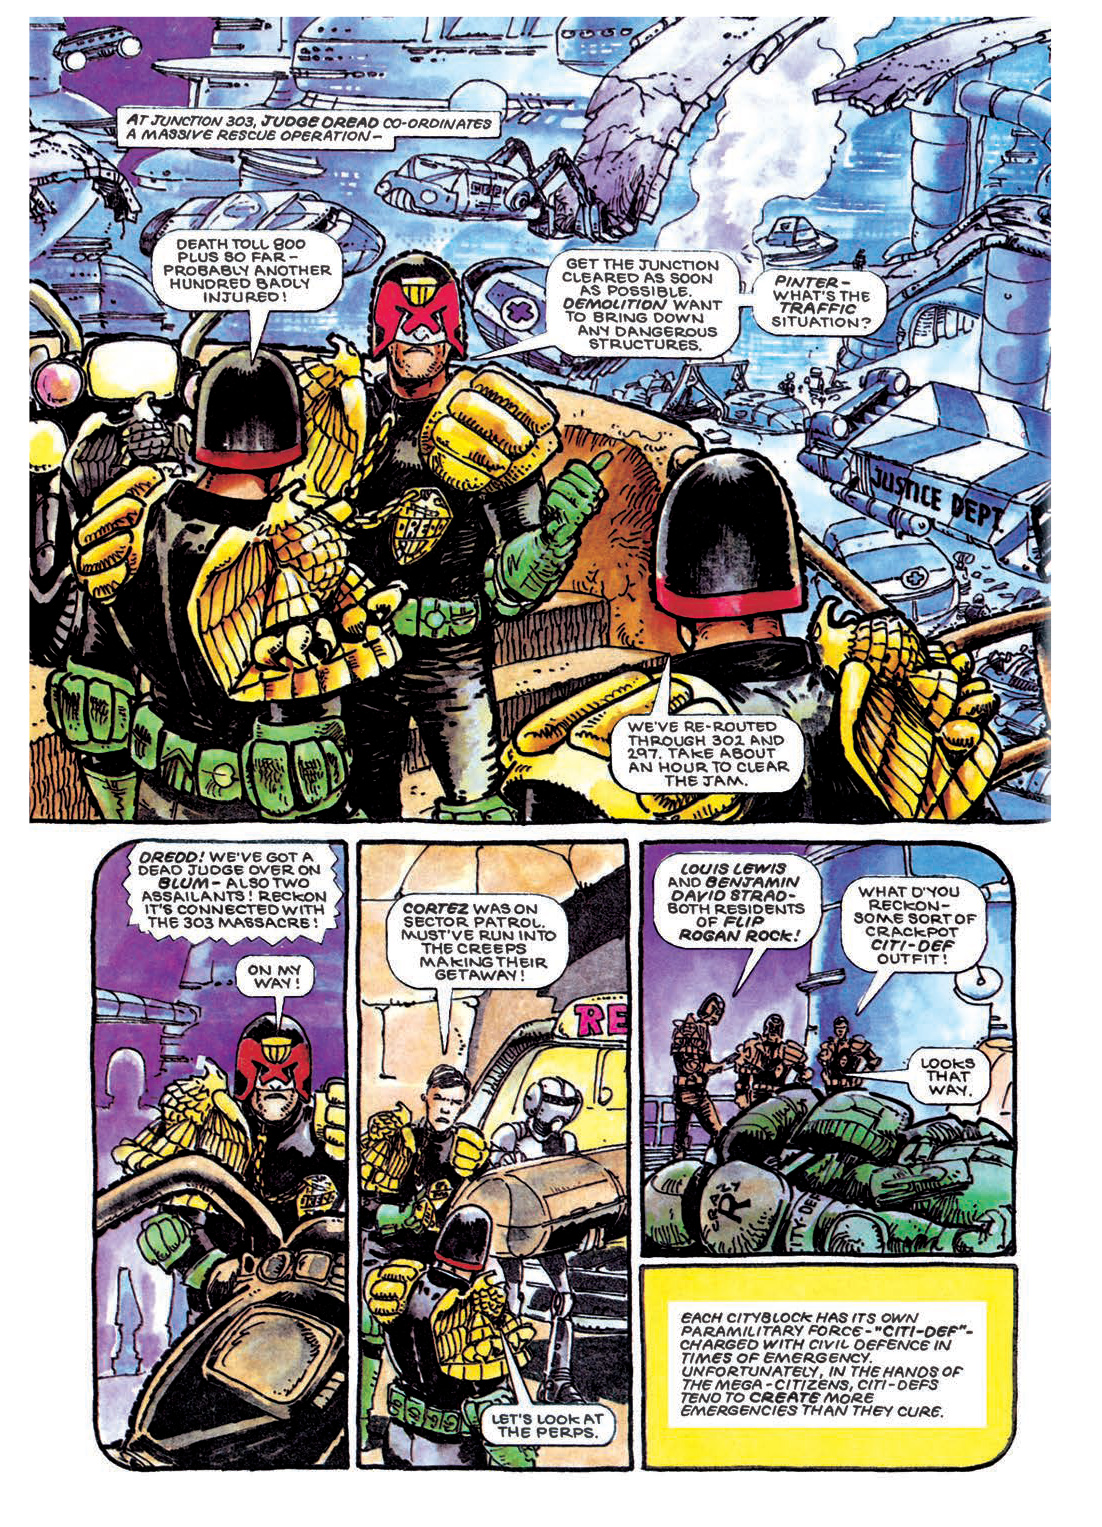 Read online Judge Dredd: The Restricted Files comic -  Issue # TPB 2 - 35